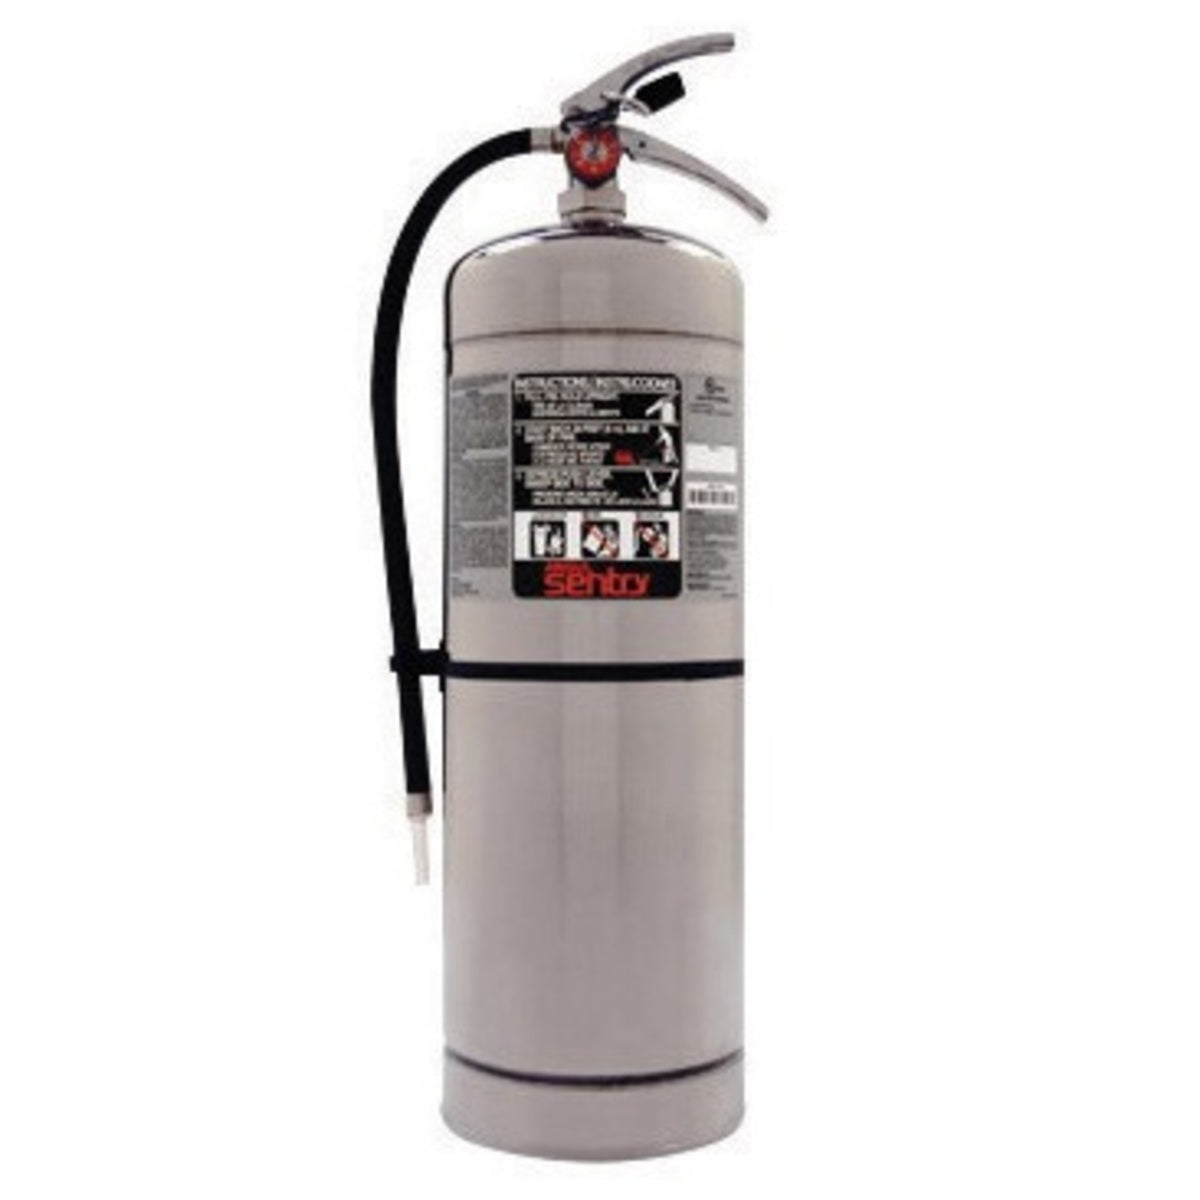 Ansul® Model W02-1 SENTRY® 2.5 gal A Fire Extinguisher-eSafety Supplies, Inc